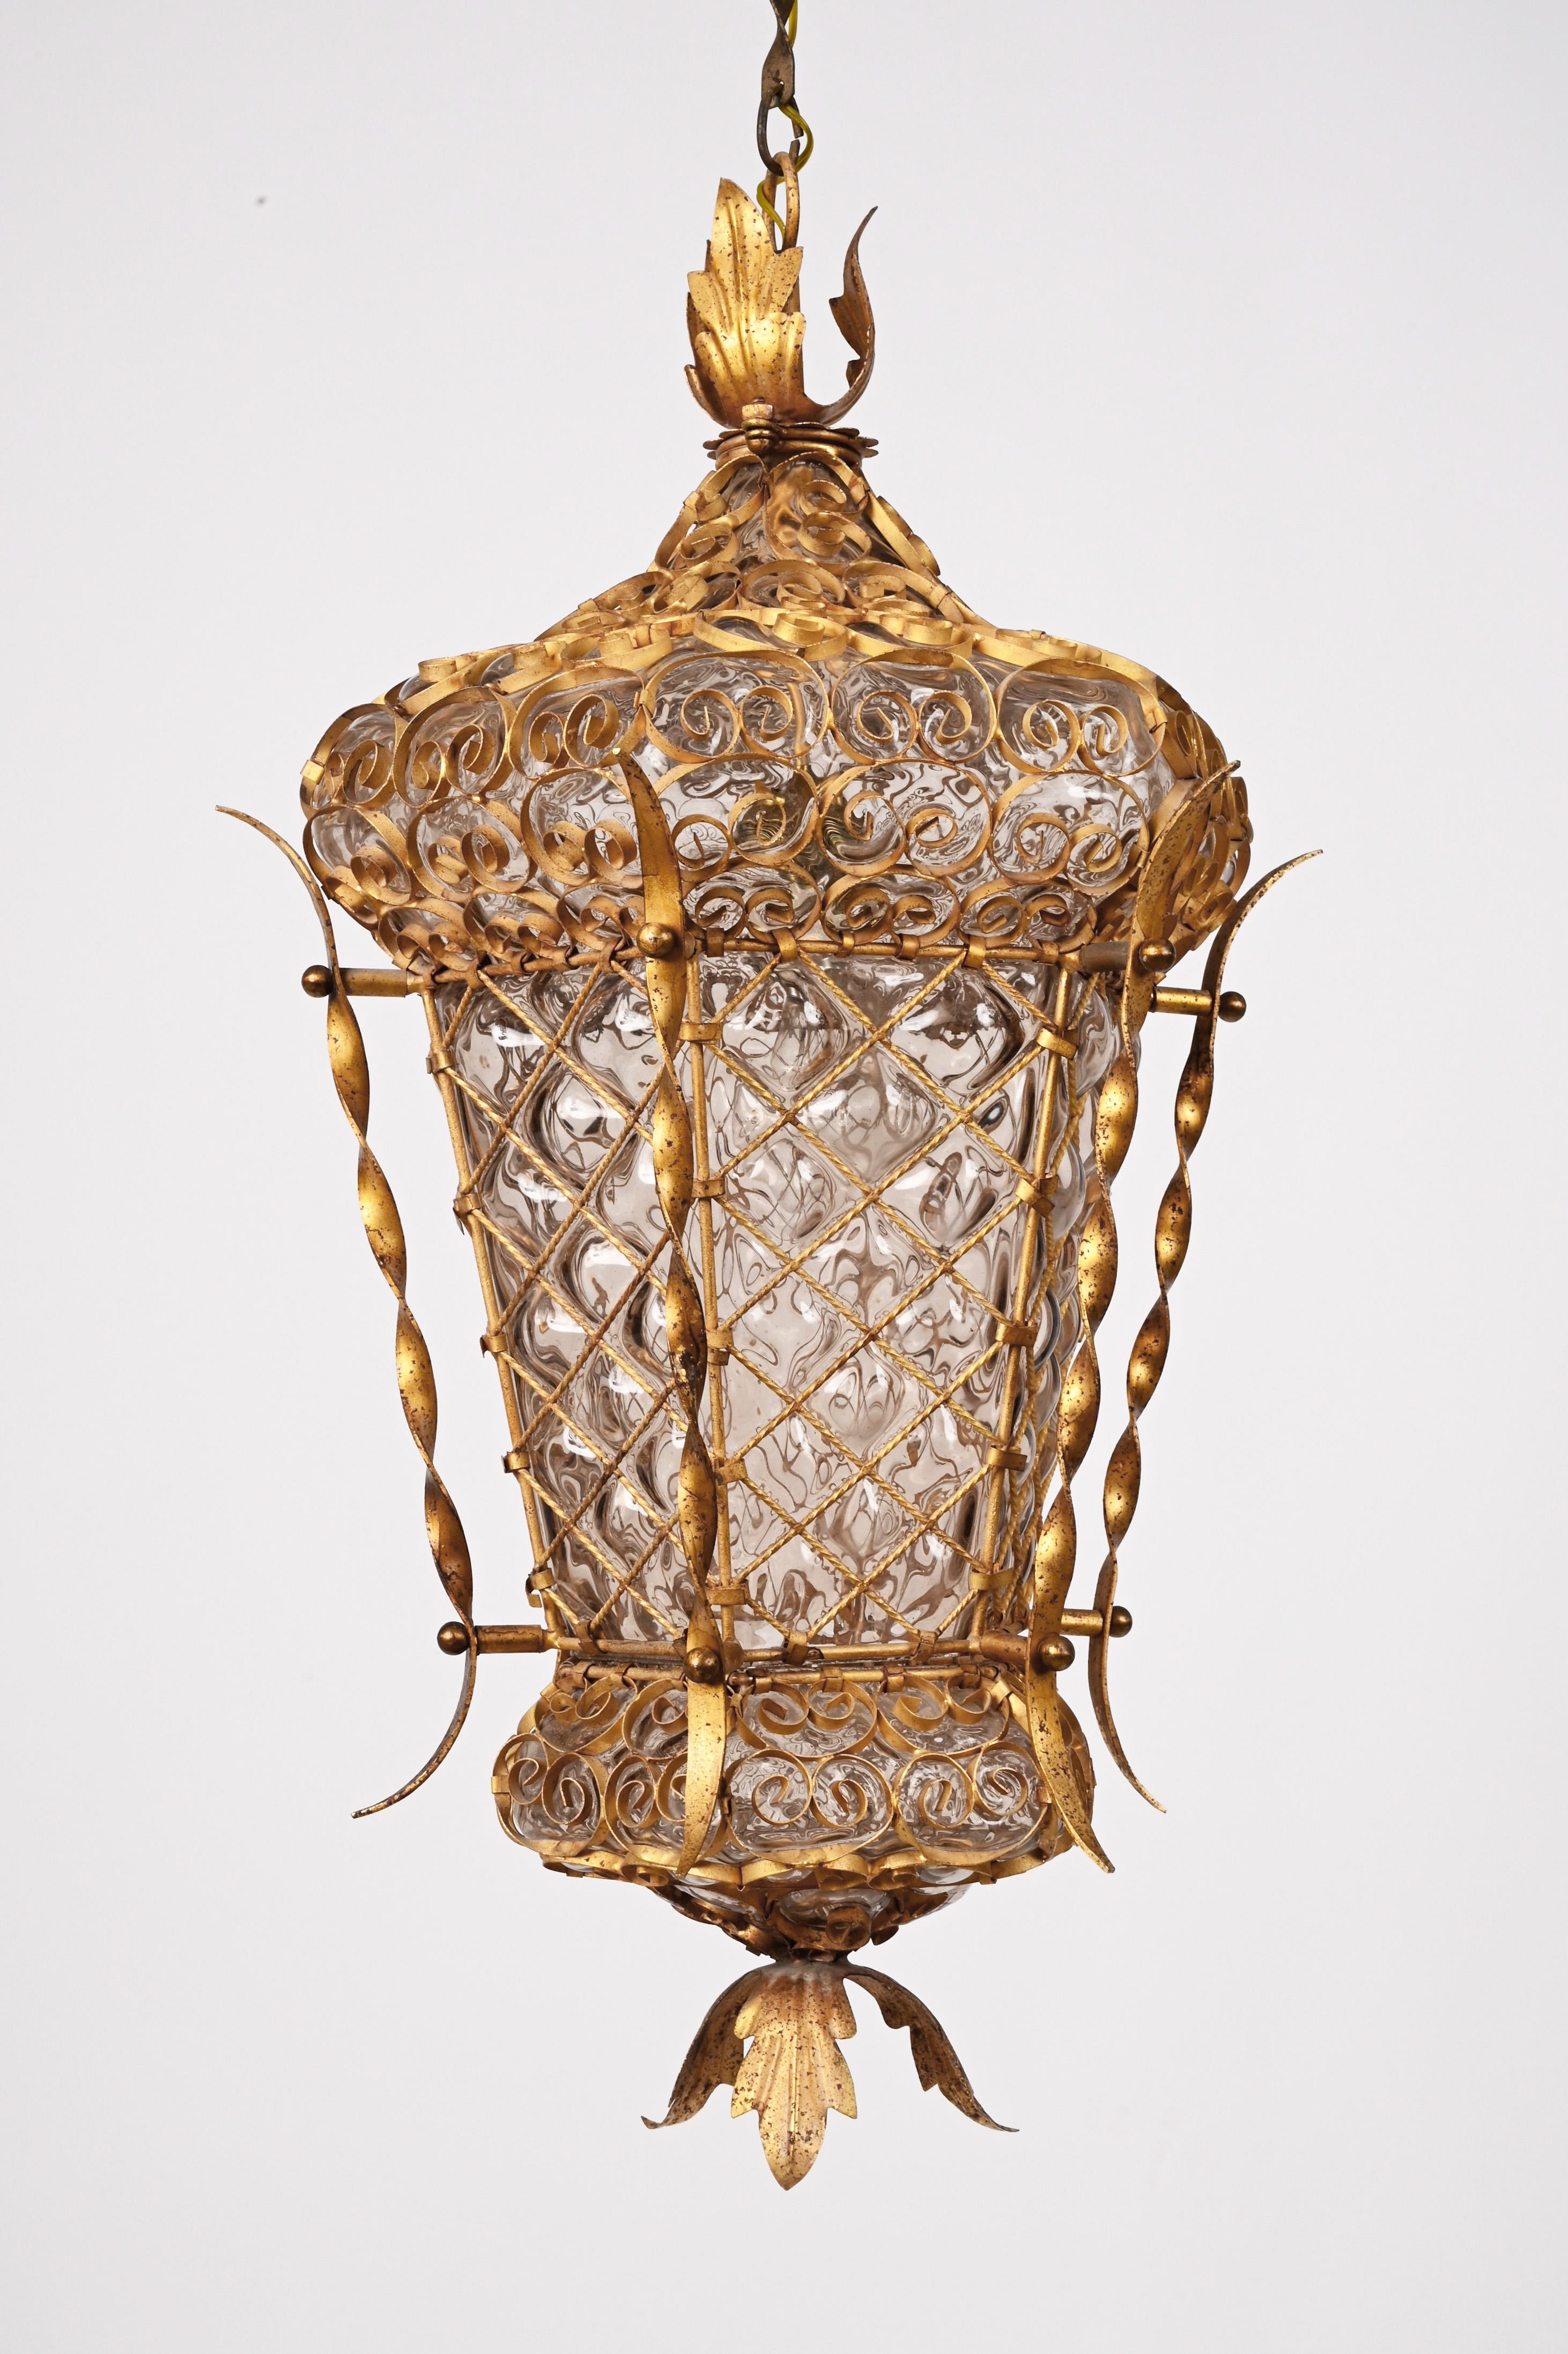 Midcentury Venetian Mouth Blown Glass in Gold Painted Metal Frame Lantern, 1940s For Sale 1